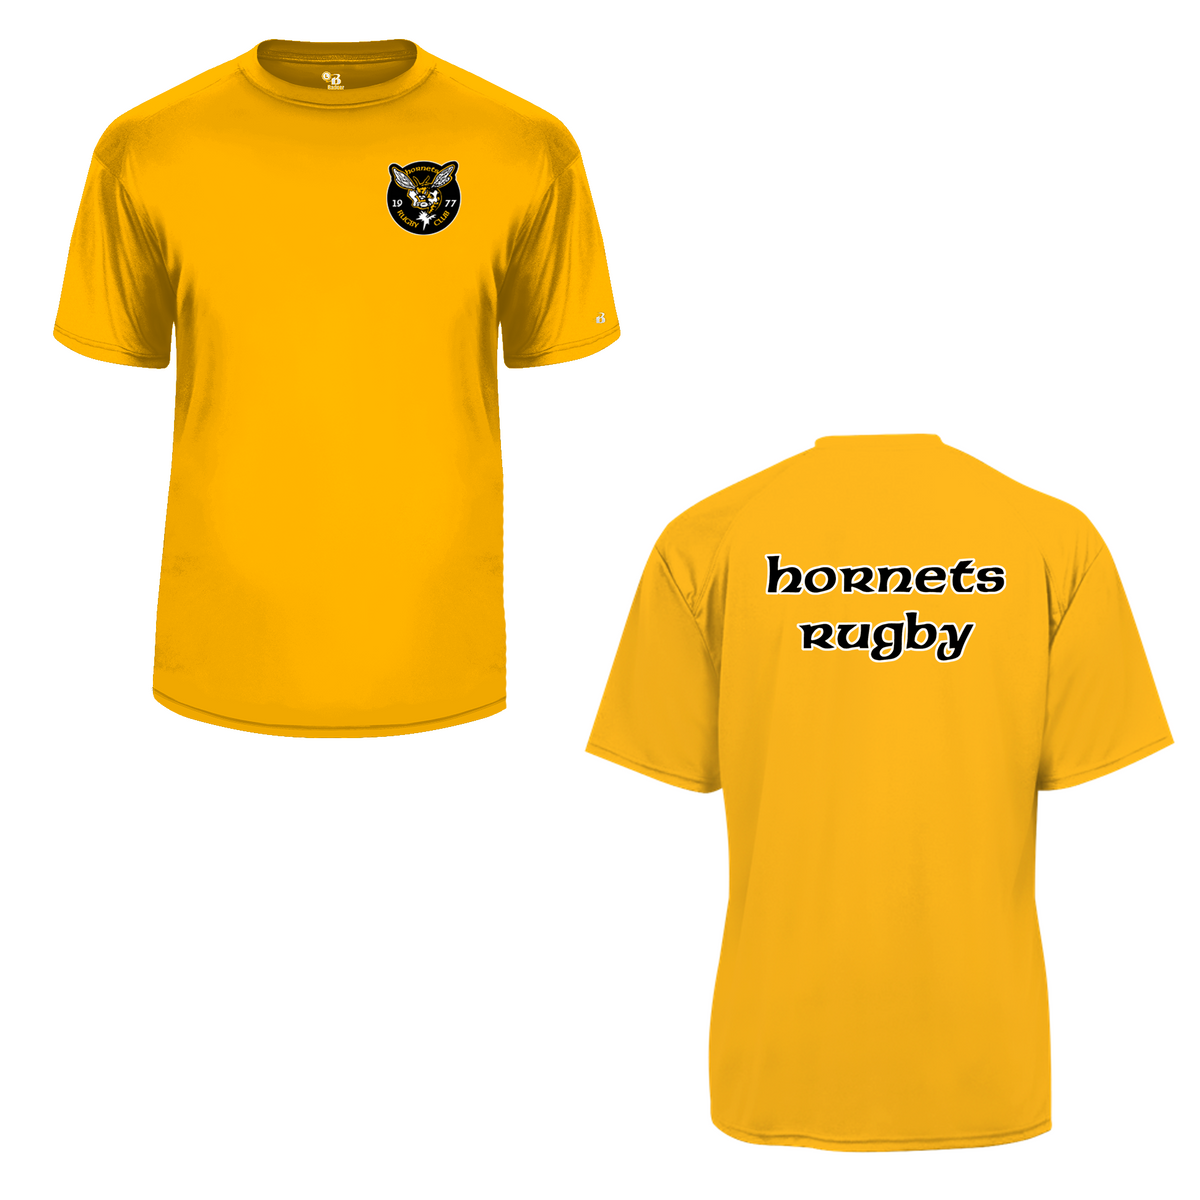 St. Louis Hornets Rugby Club B-Core Tee